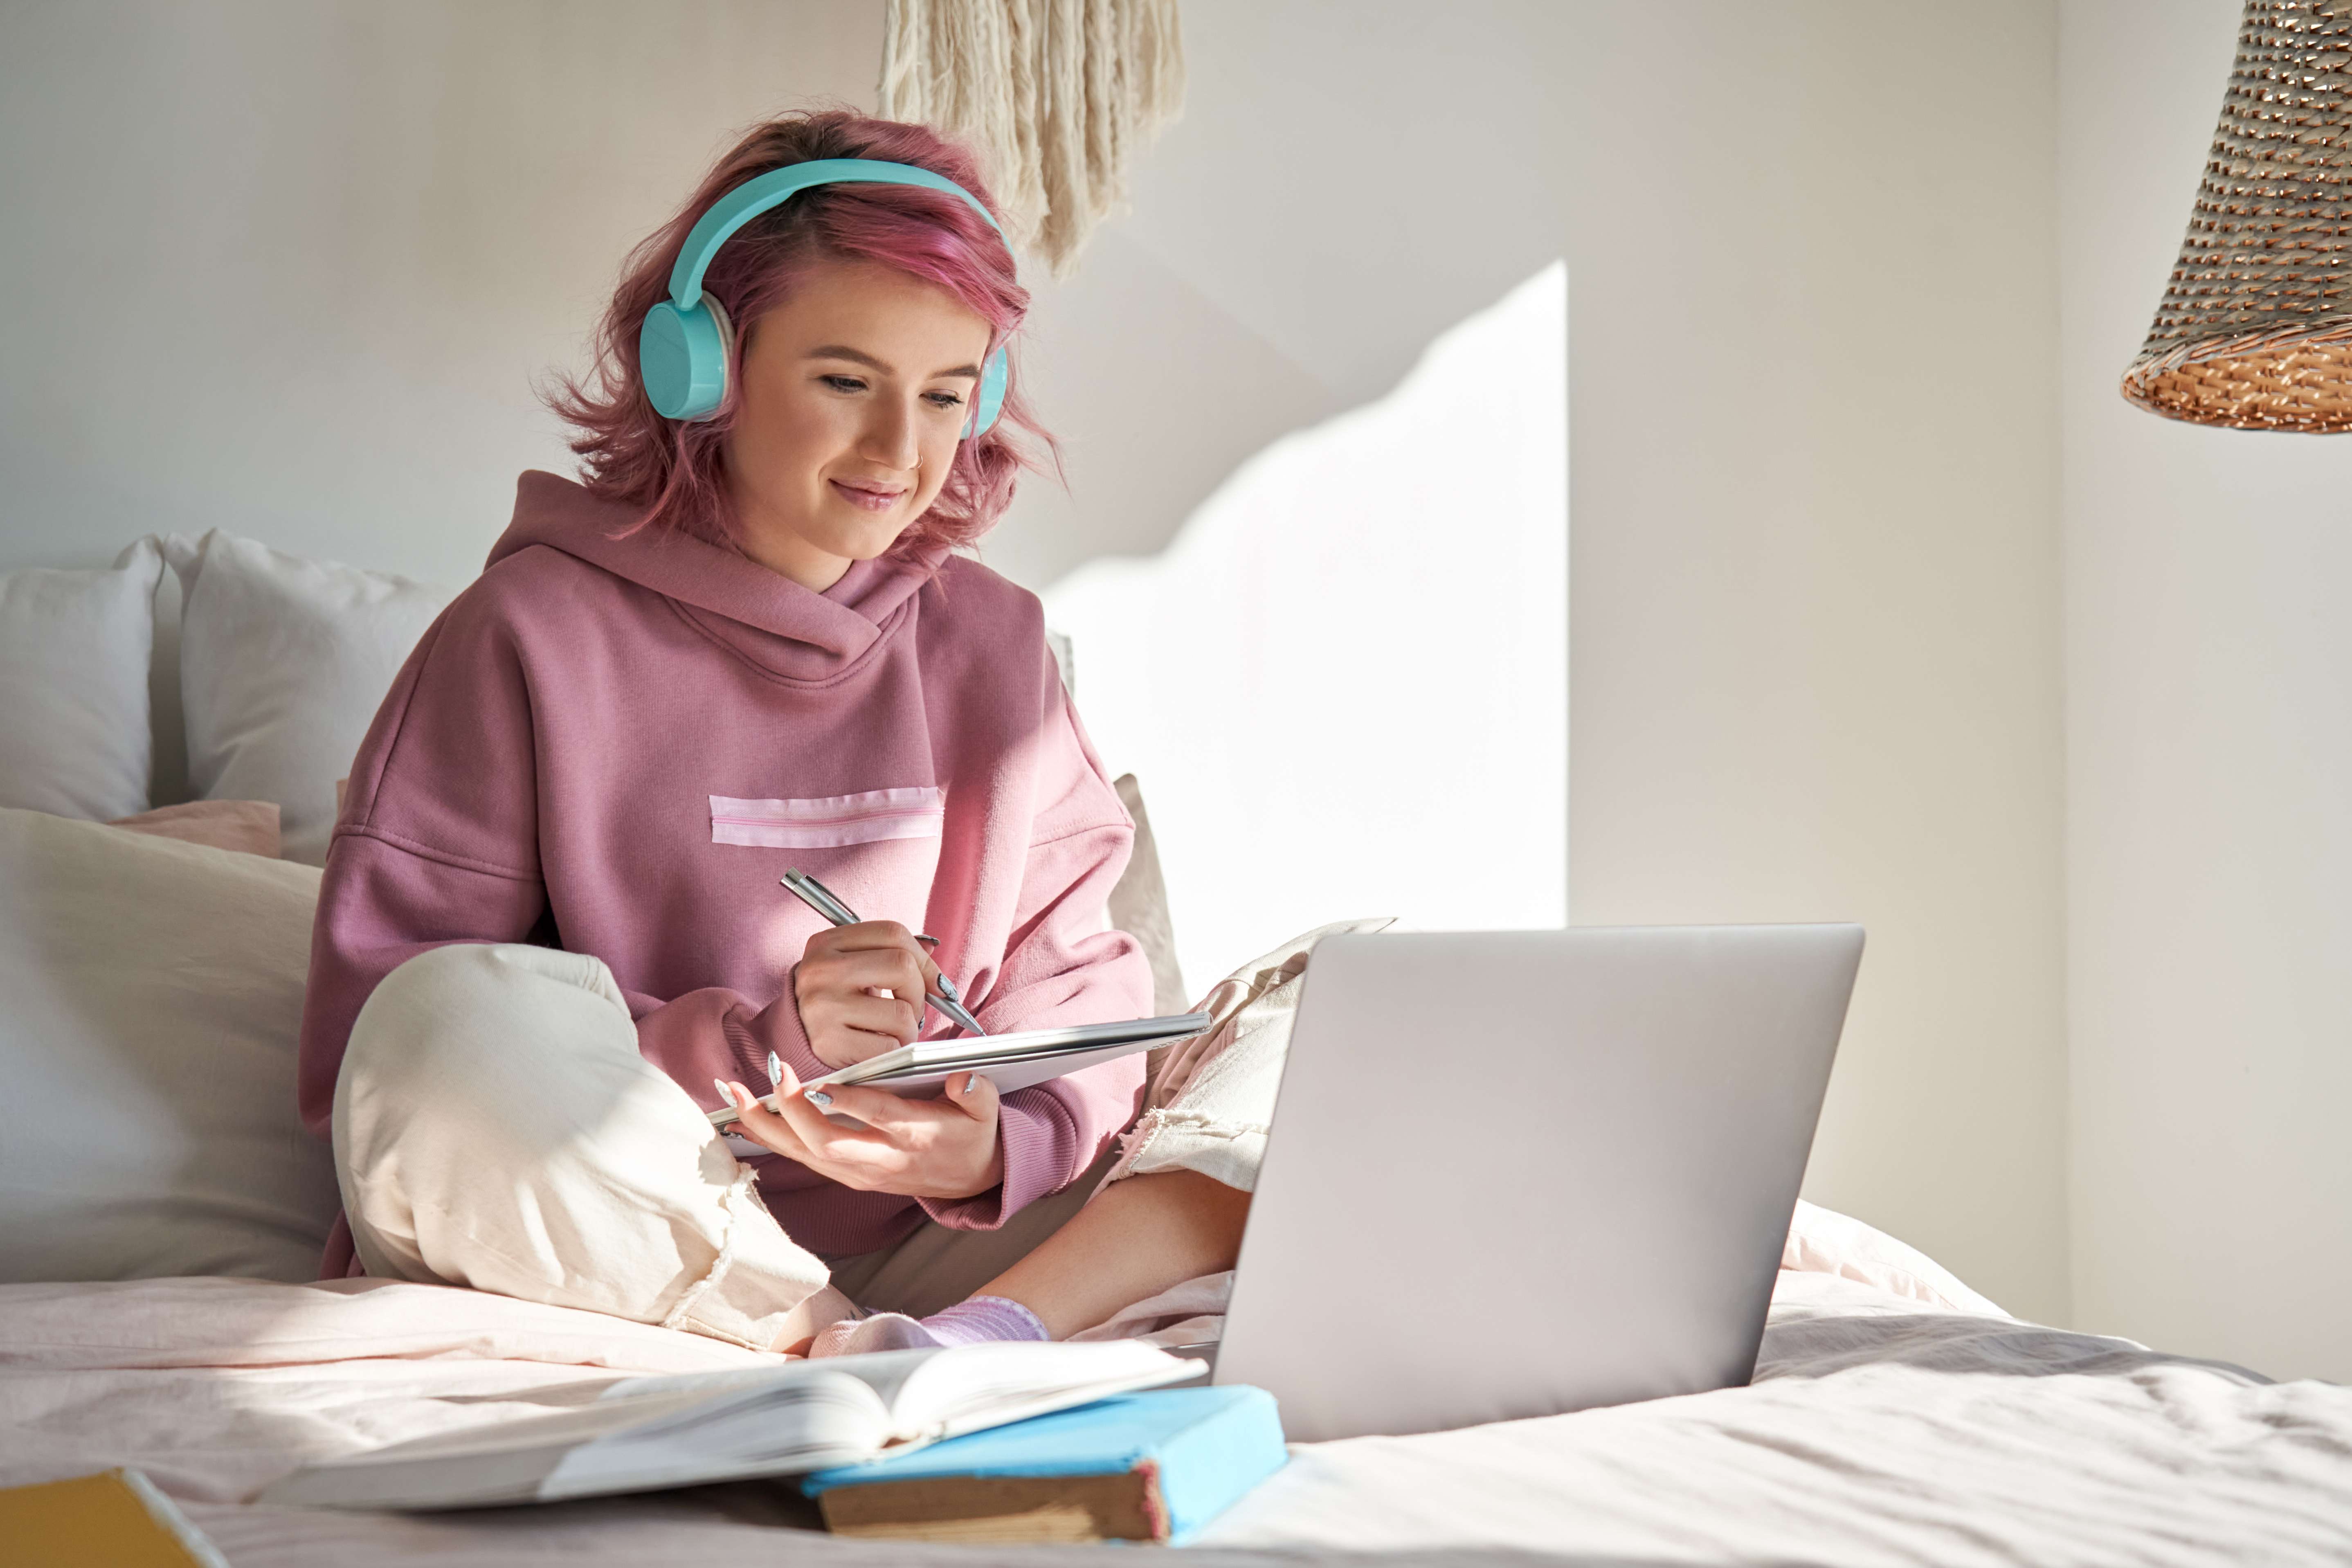 Teen girl with pink hair sitting on a bed, wearing headphones, writing notes and watching laptop.